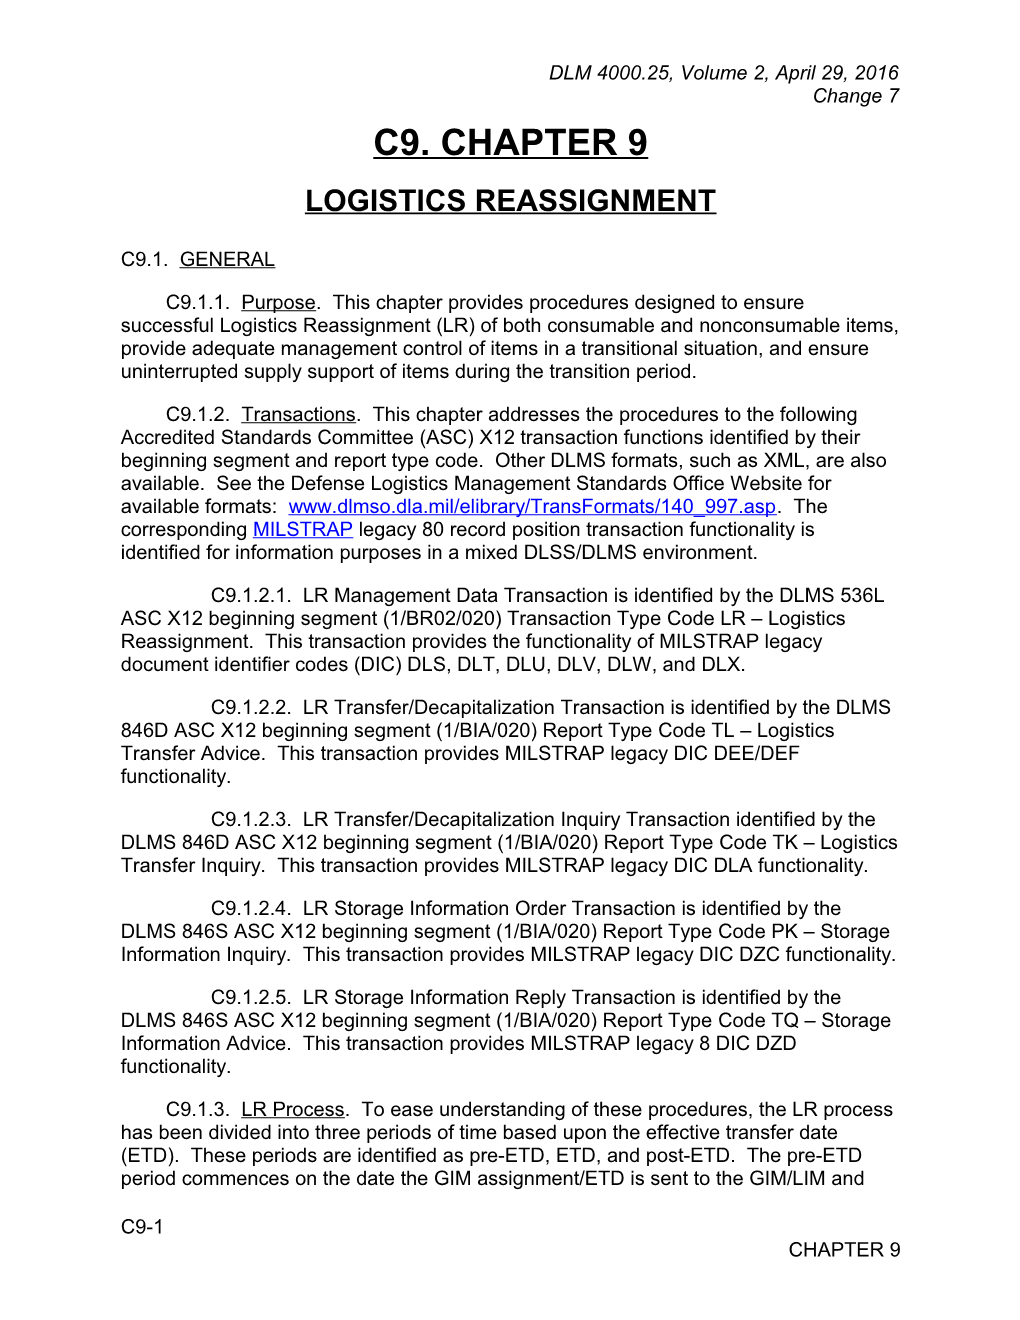 Chapter 9 - Logistics Reassignment